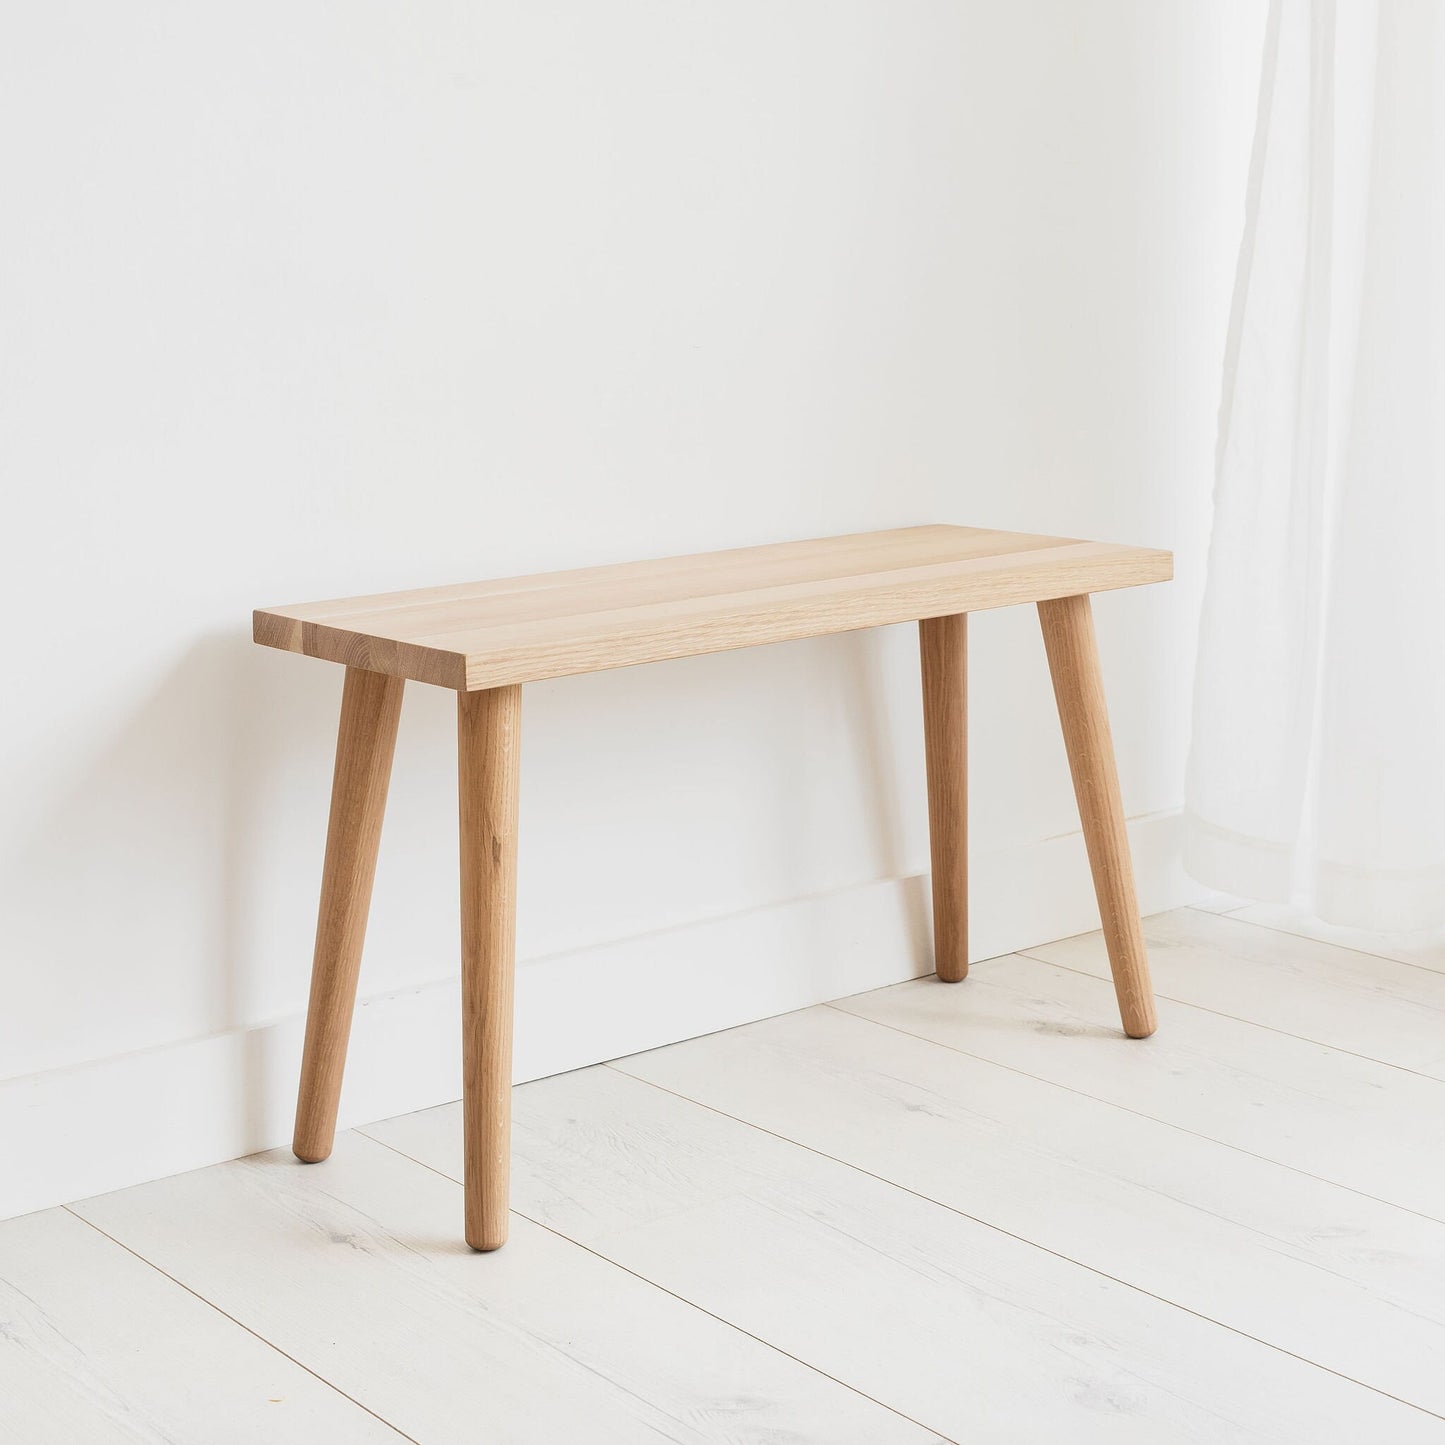 Solid Oak Hardwood Side Table Or Bench Stool. Hand Made To Order In The UK. Modern Nordic Scandinavian Furniture